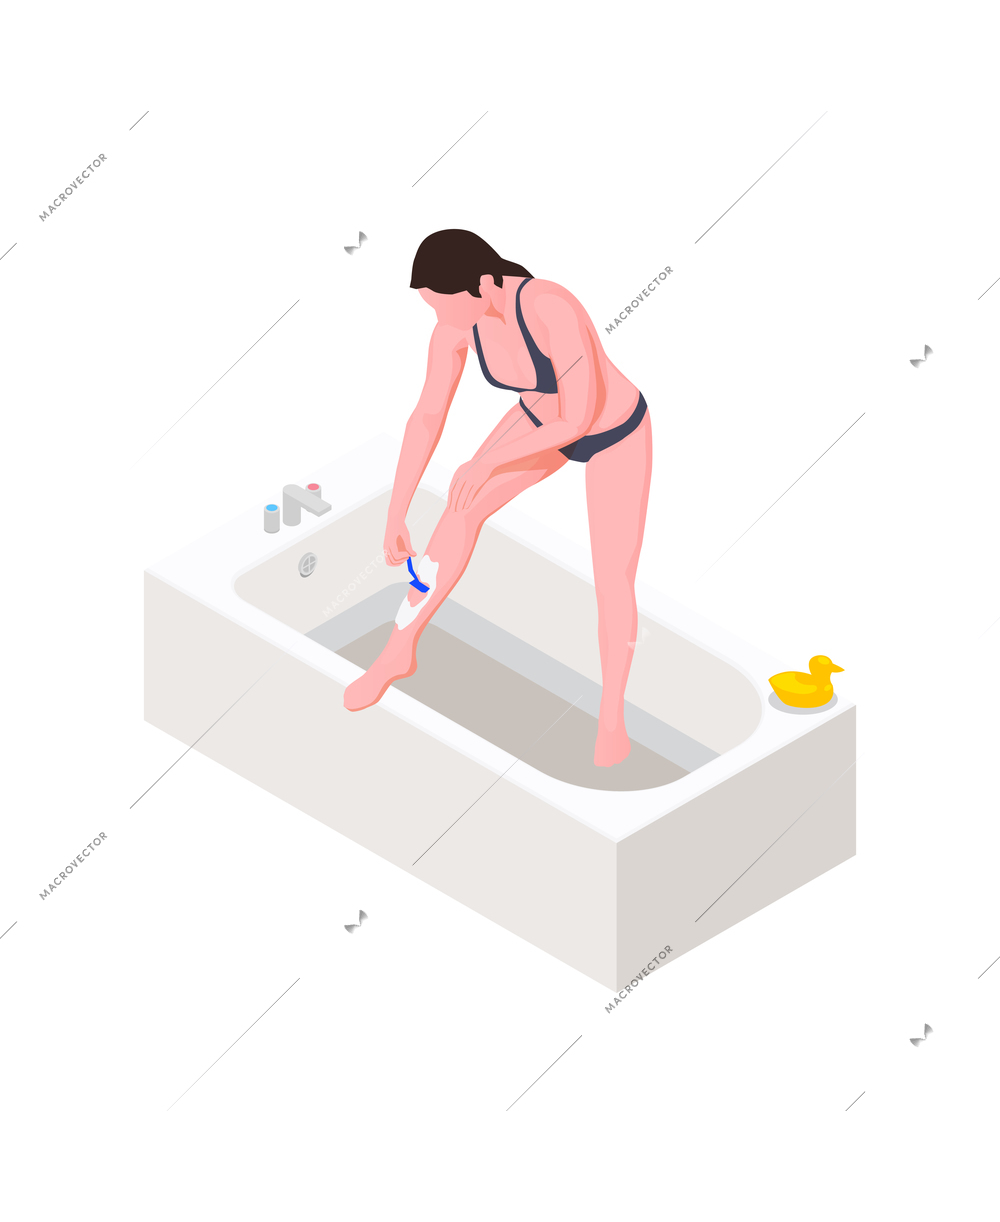 Hygiene isometric icon with woman shaving her legs in bath 3d vector illustration